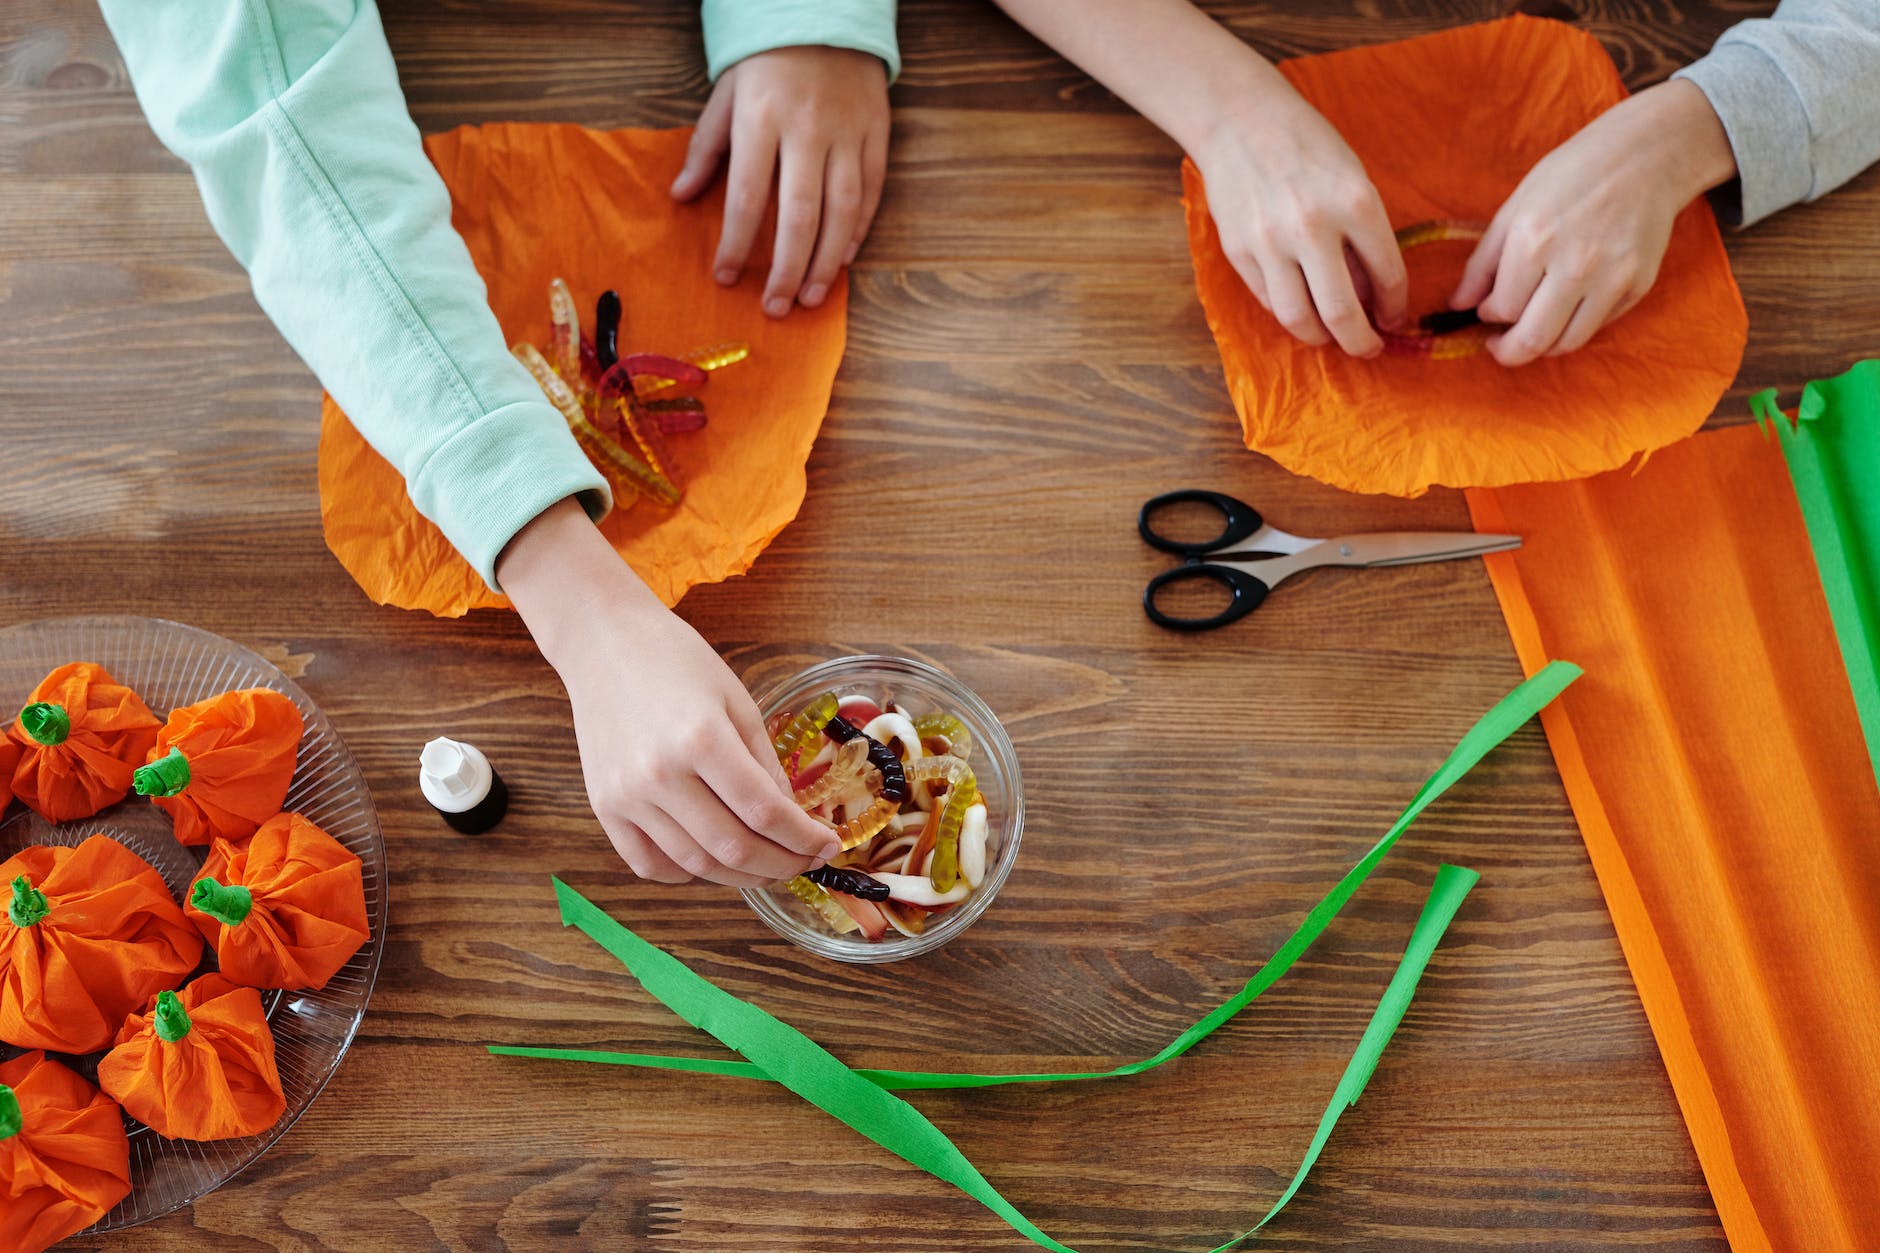 kids wrapping candies in an orange paper